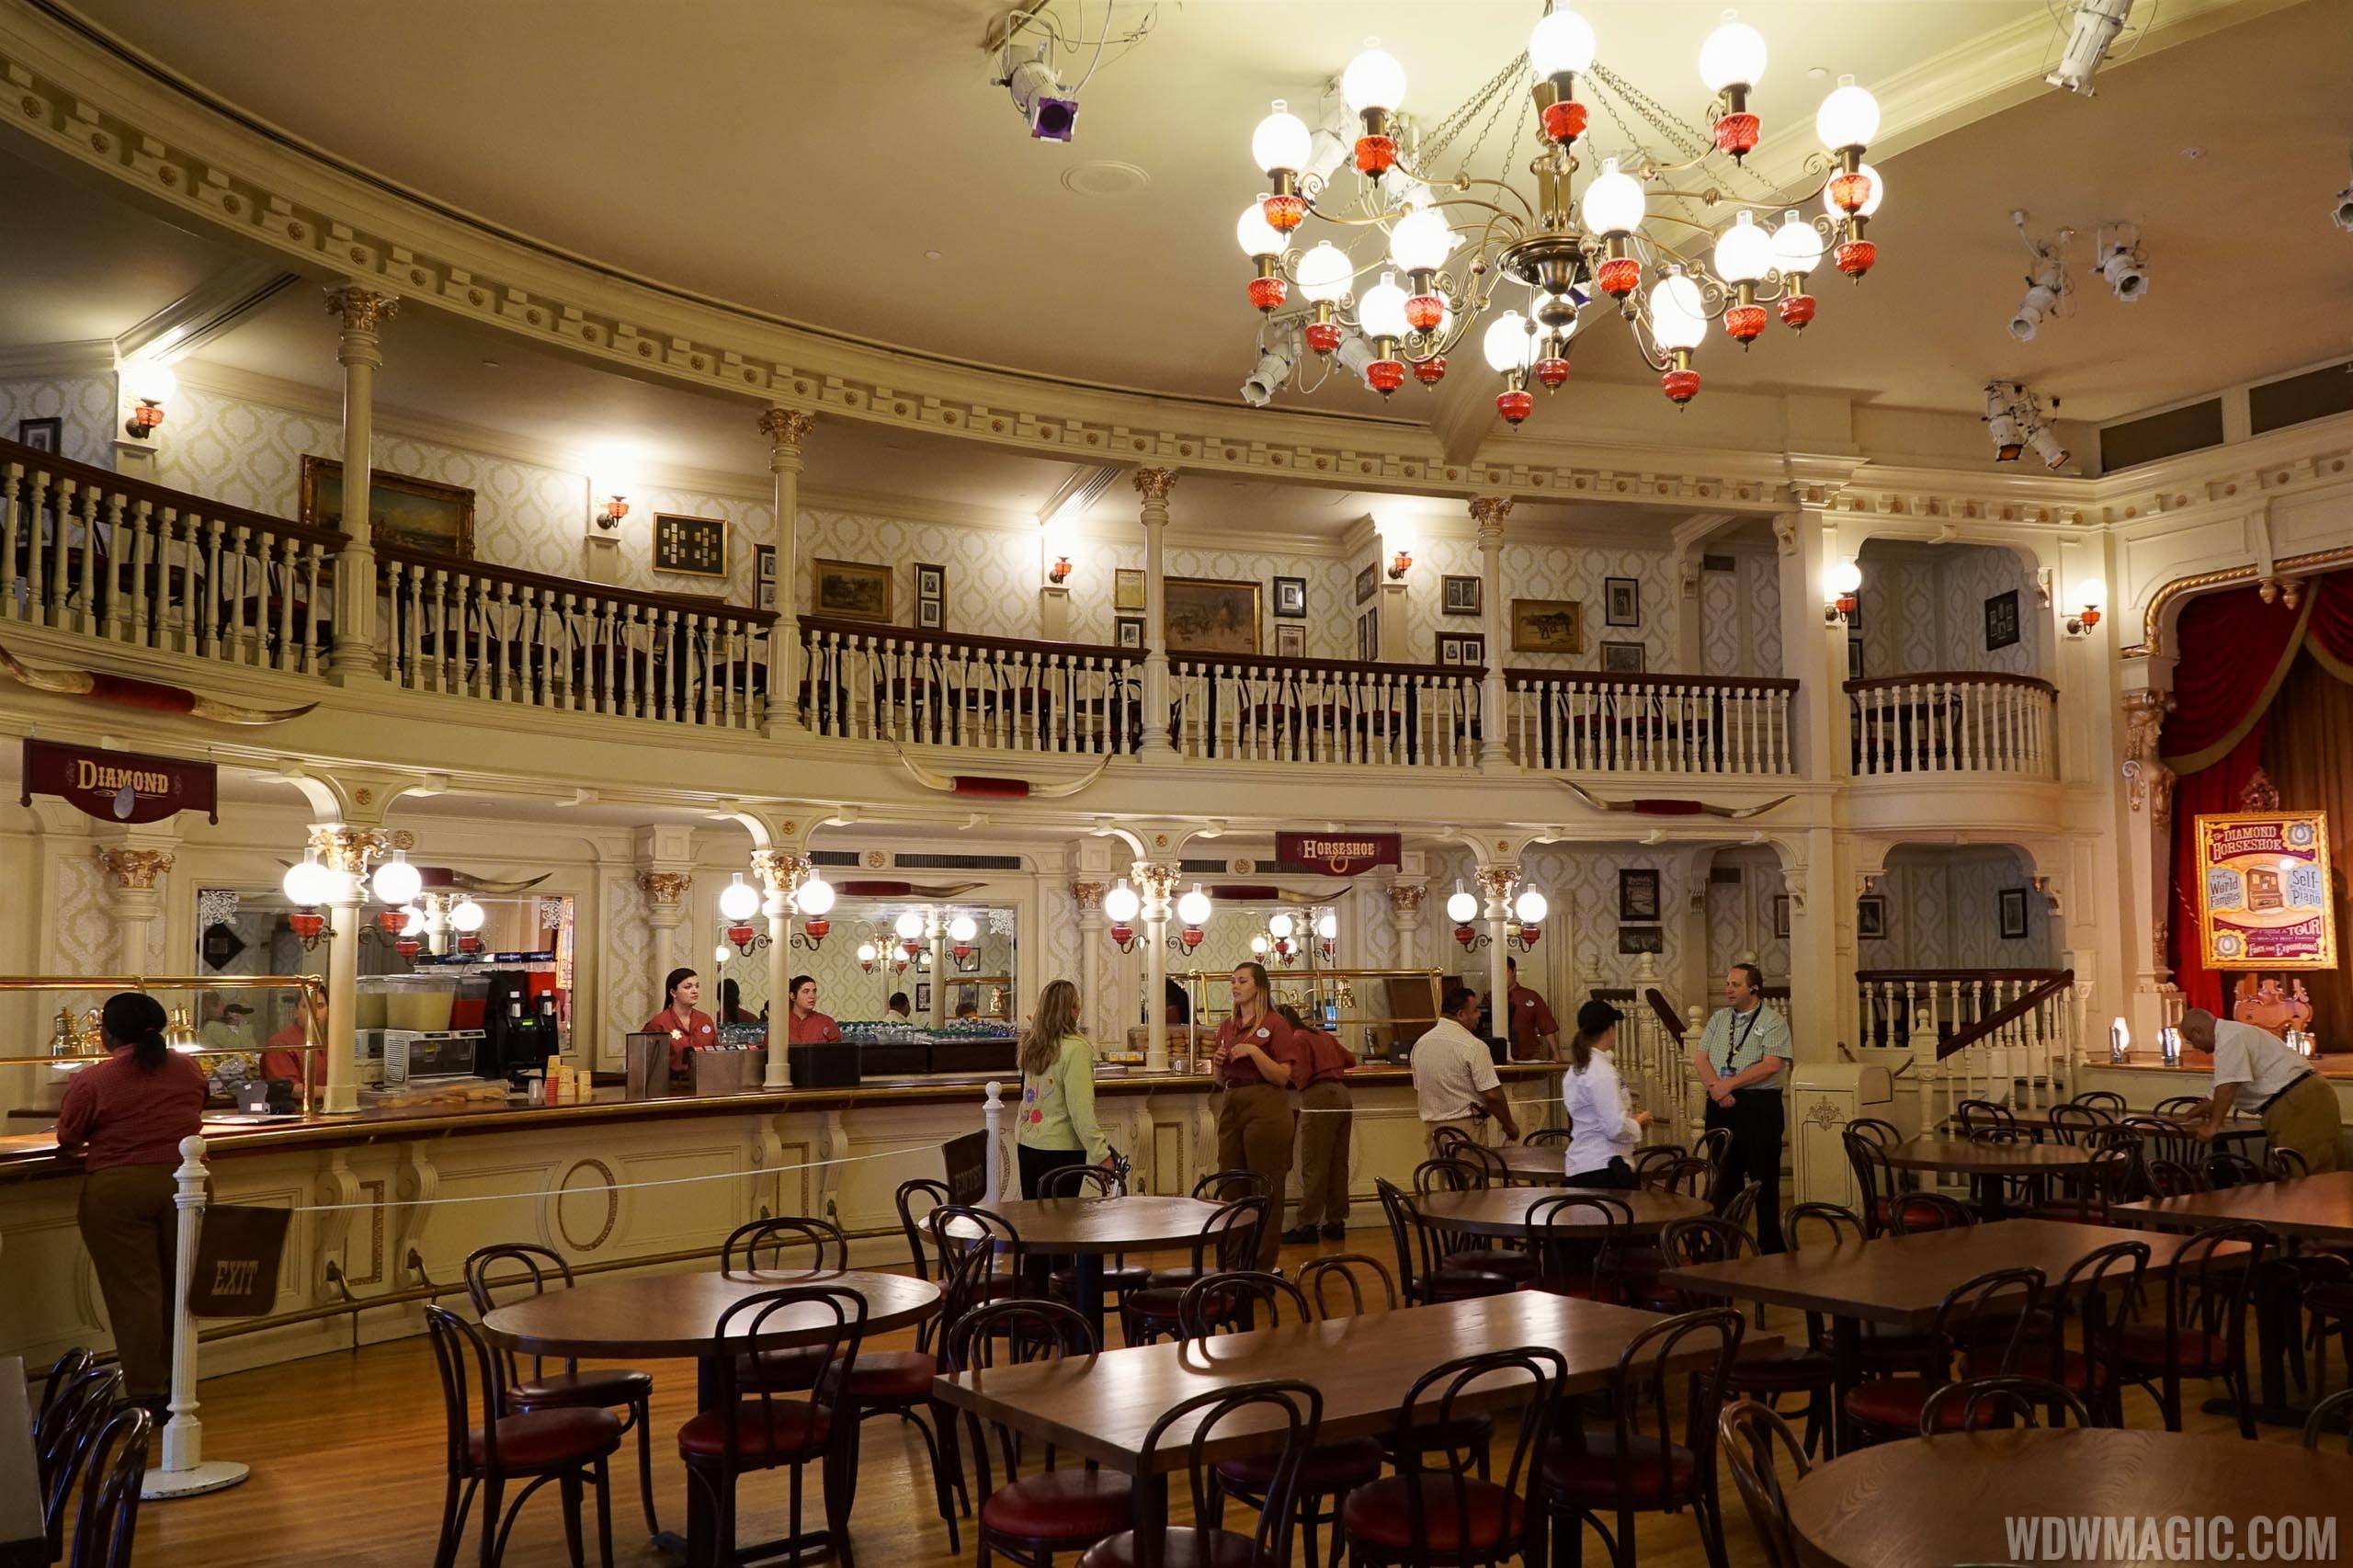 Diamond Horseshoe opening soon for table service lunch and dinner